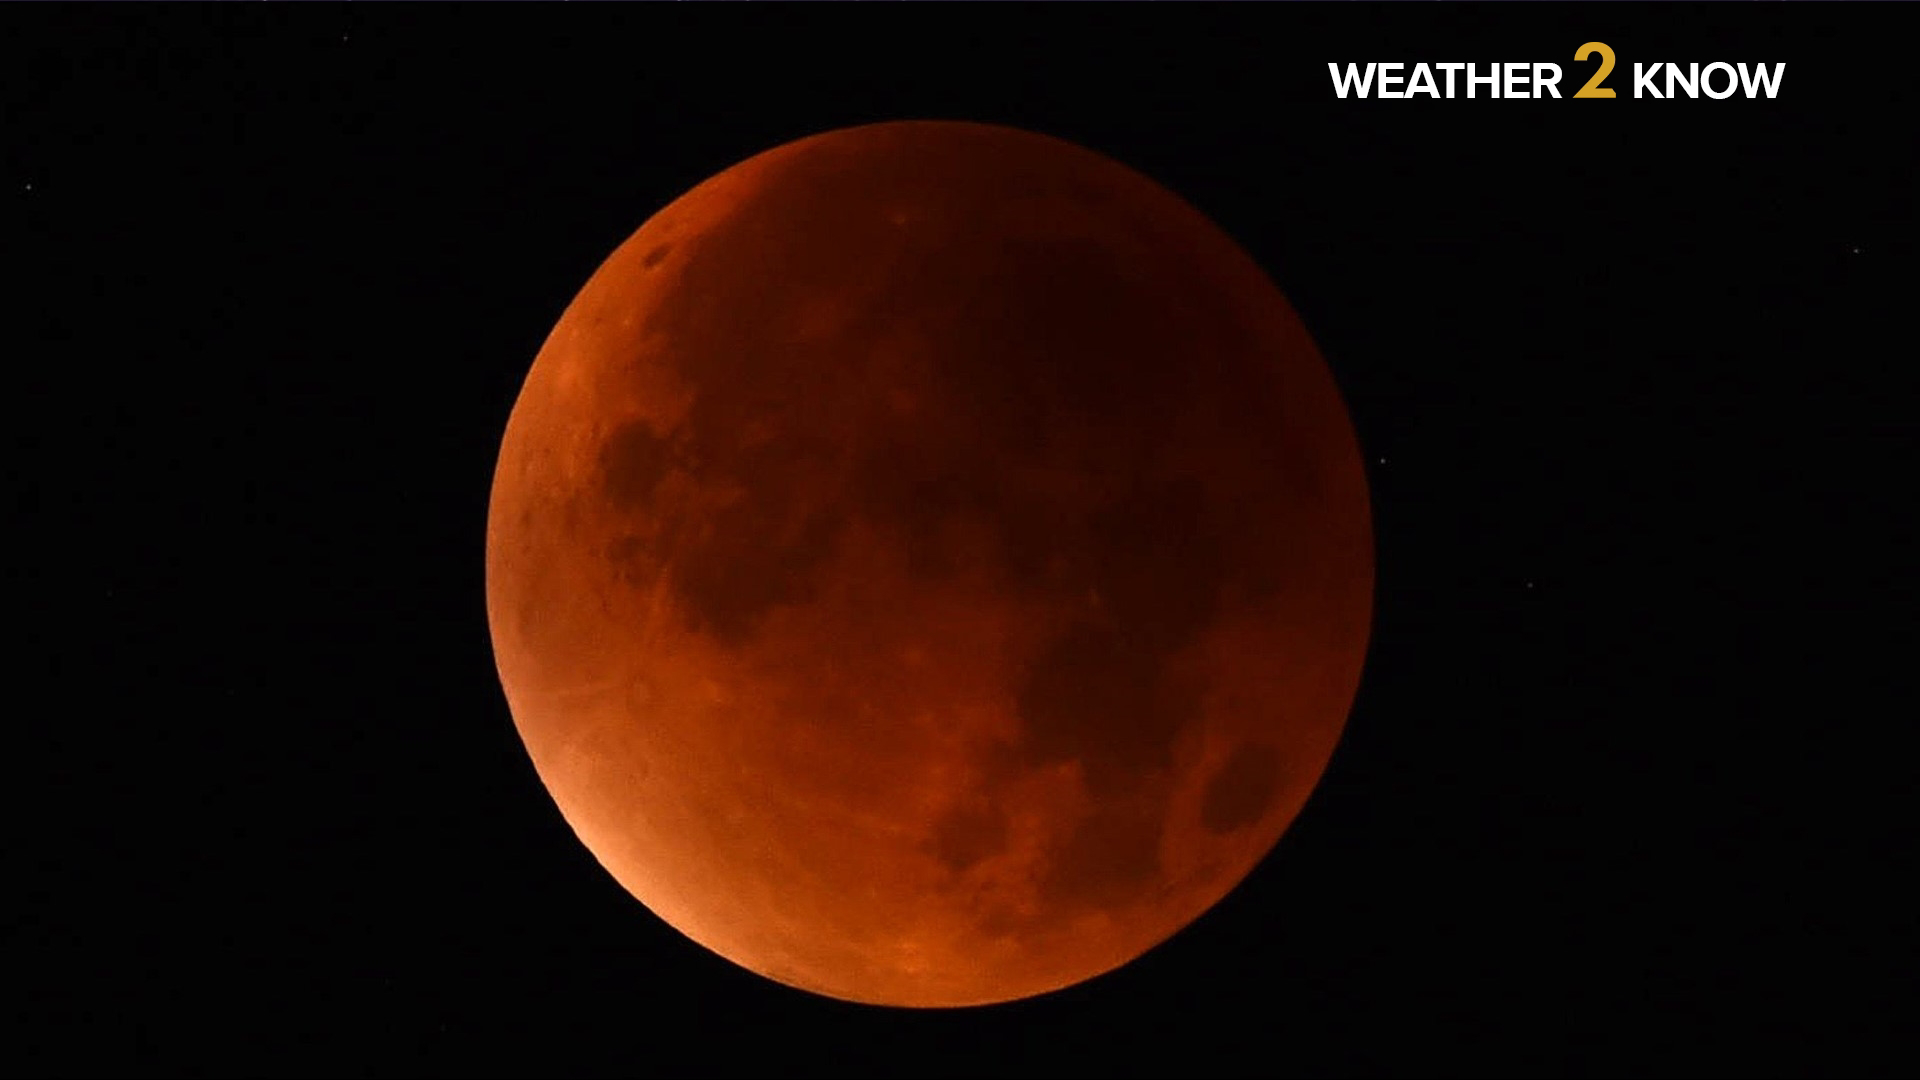 The U.S. will be able to see the Lunar Eclipse, or Blood Moon, this Sunday night - Monday morning May 15-16.